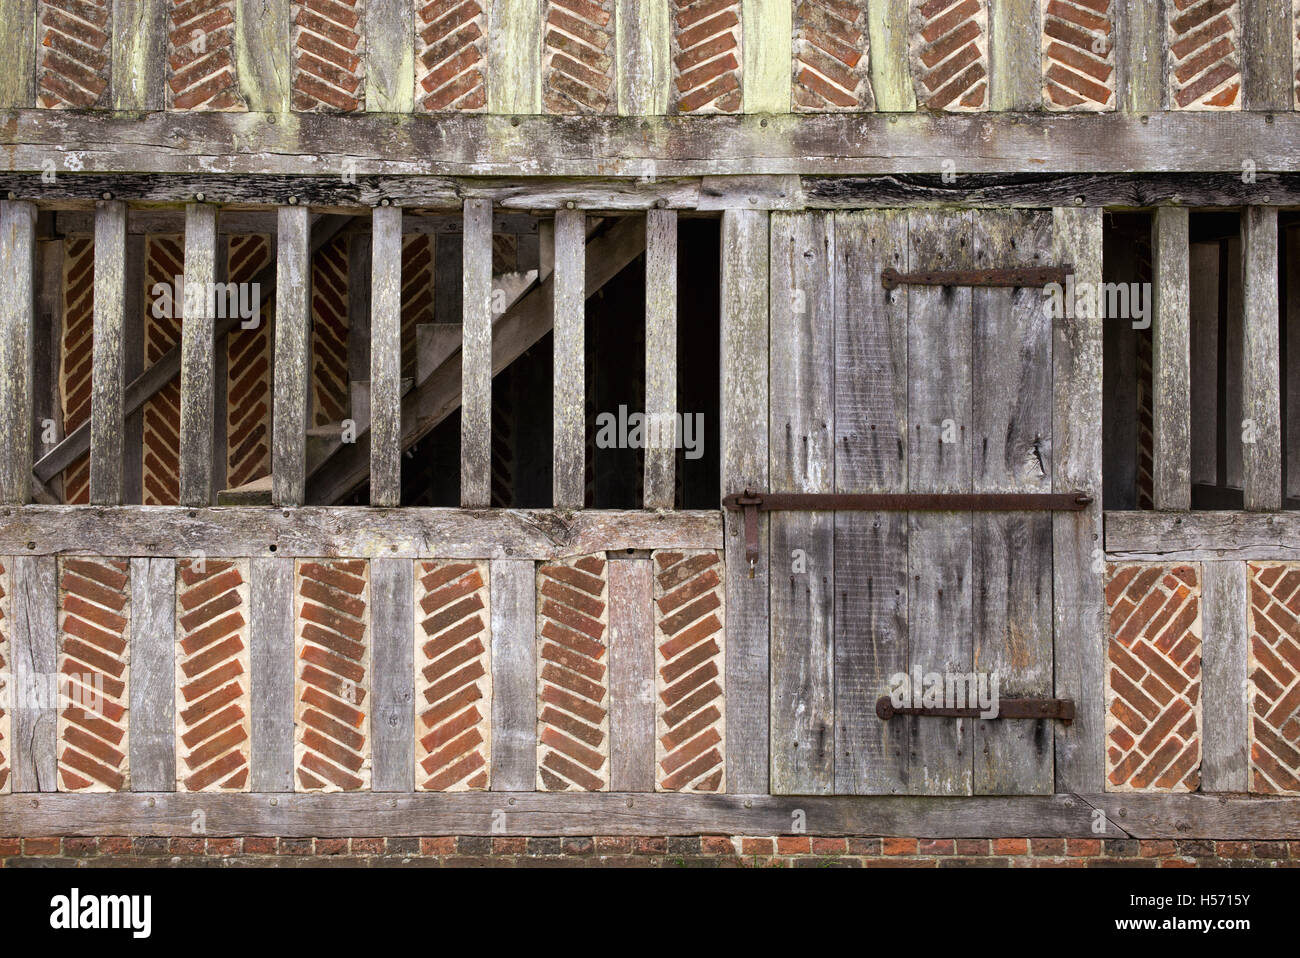 Timber frame and brick market hall detail at Weald and Downland open air museum, Singleton, Sussex, England Stock Photo